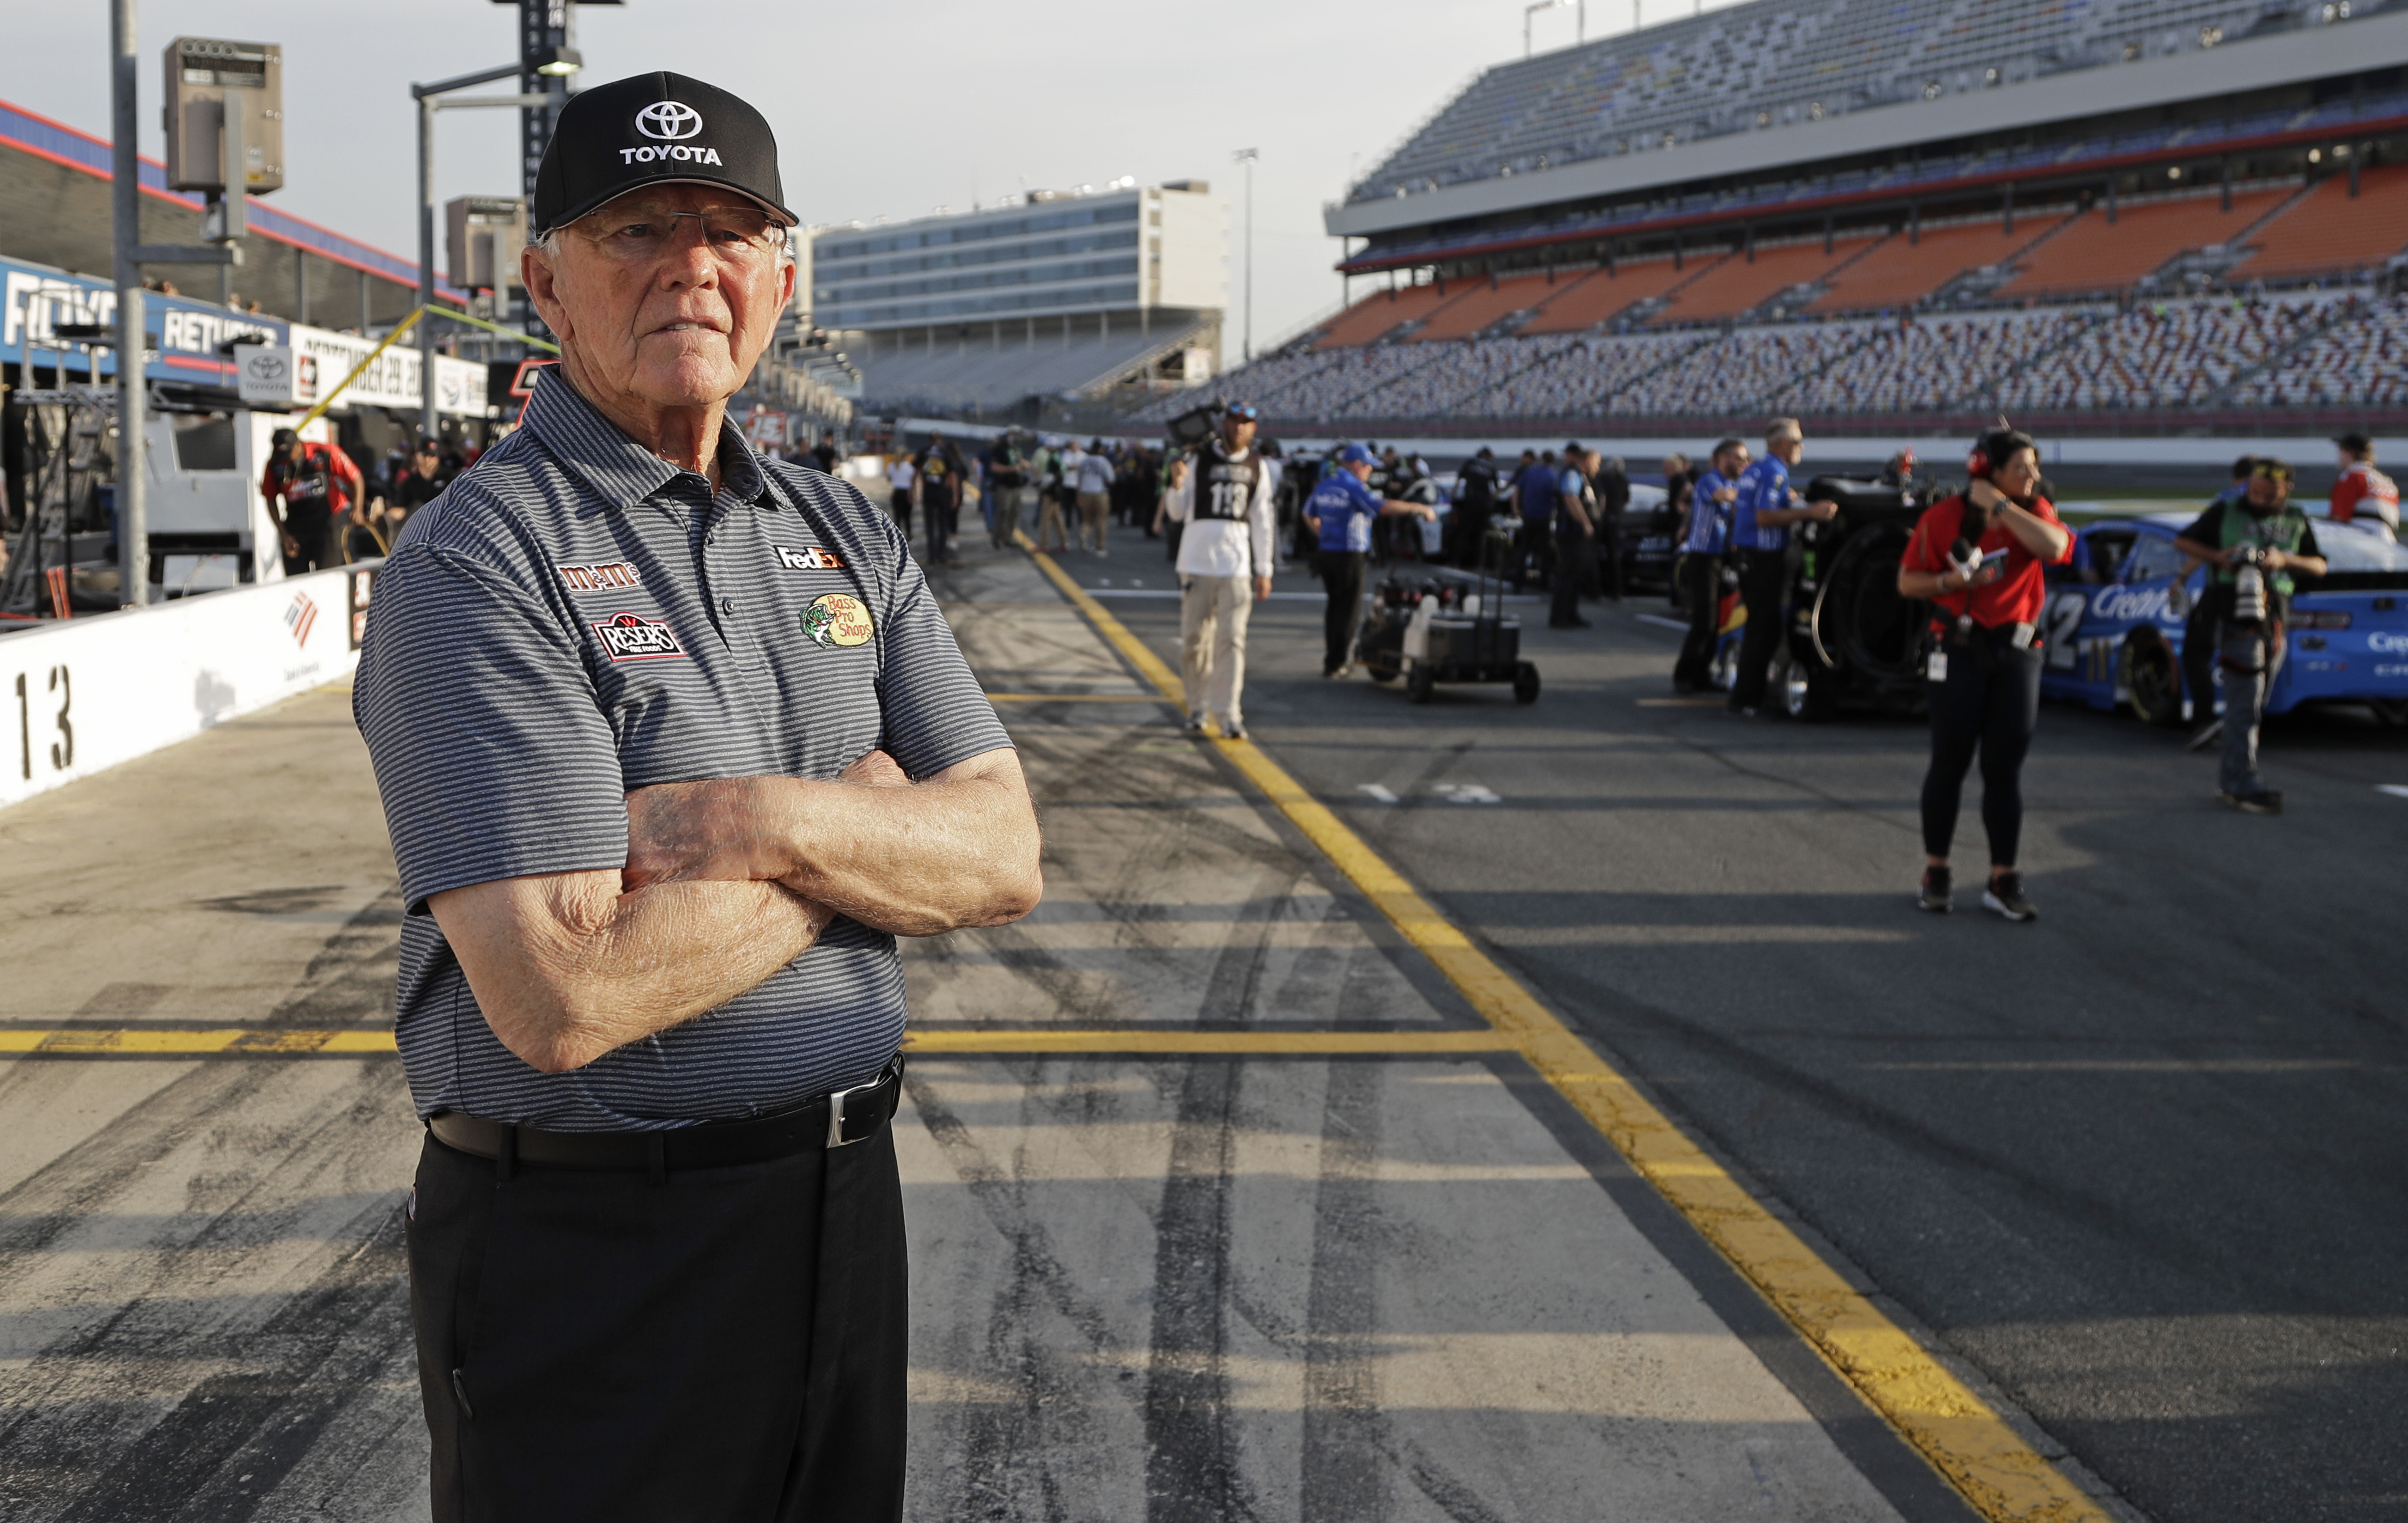 With champs in tow, Gibbs stands tall as class of NASCAR